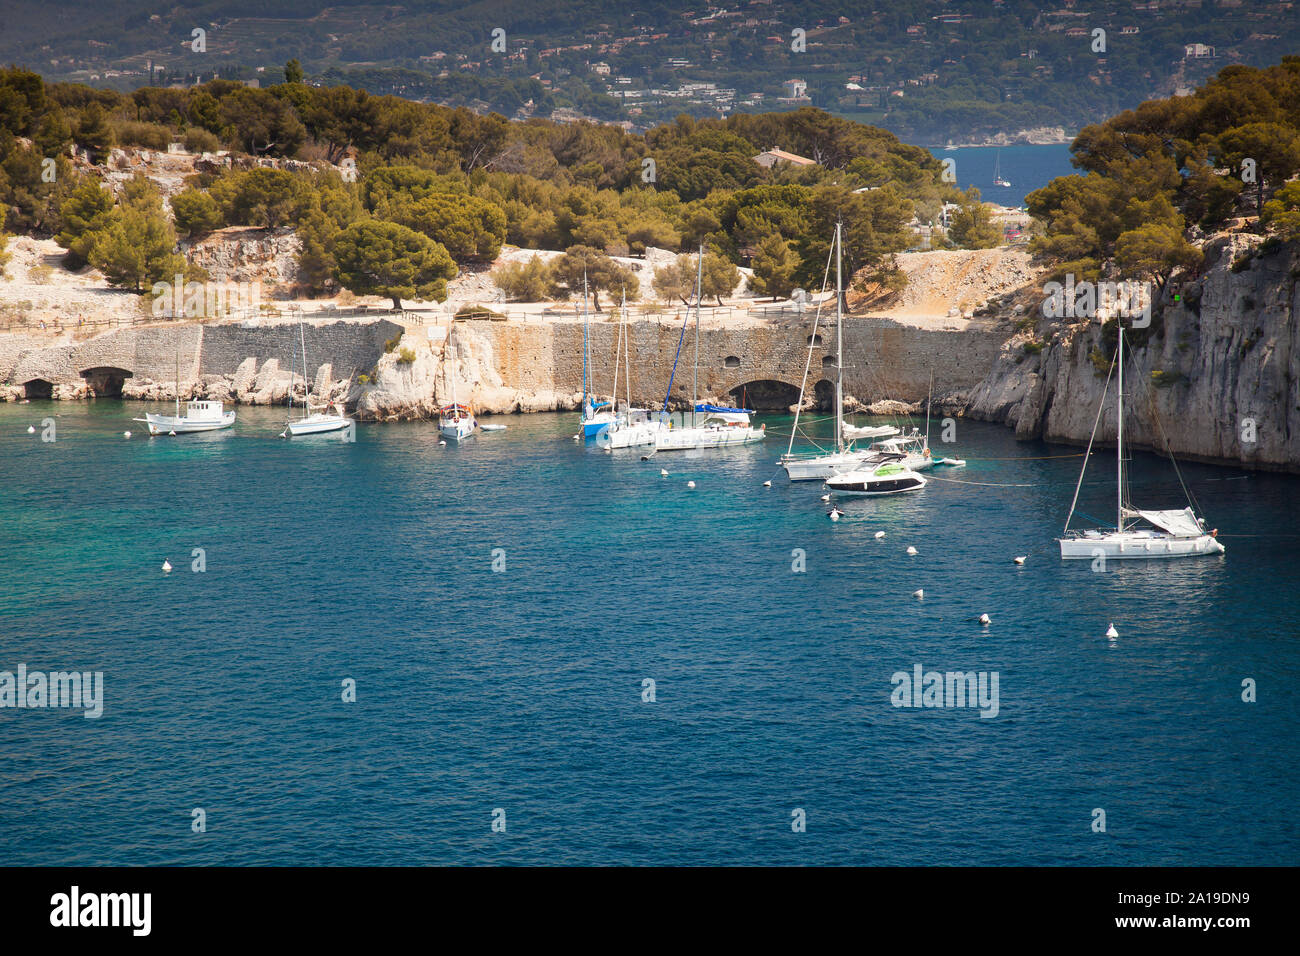 Sailboats moored in a bay of the rocky coast, Calanque de Port Pin, Provence, France, Europe Stock Photo